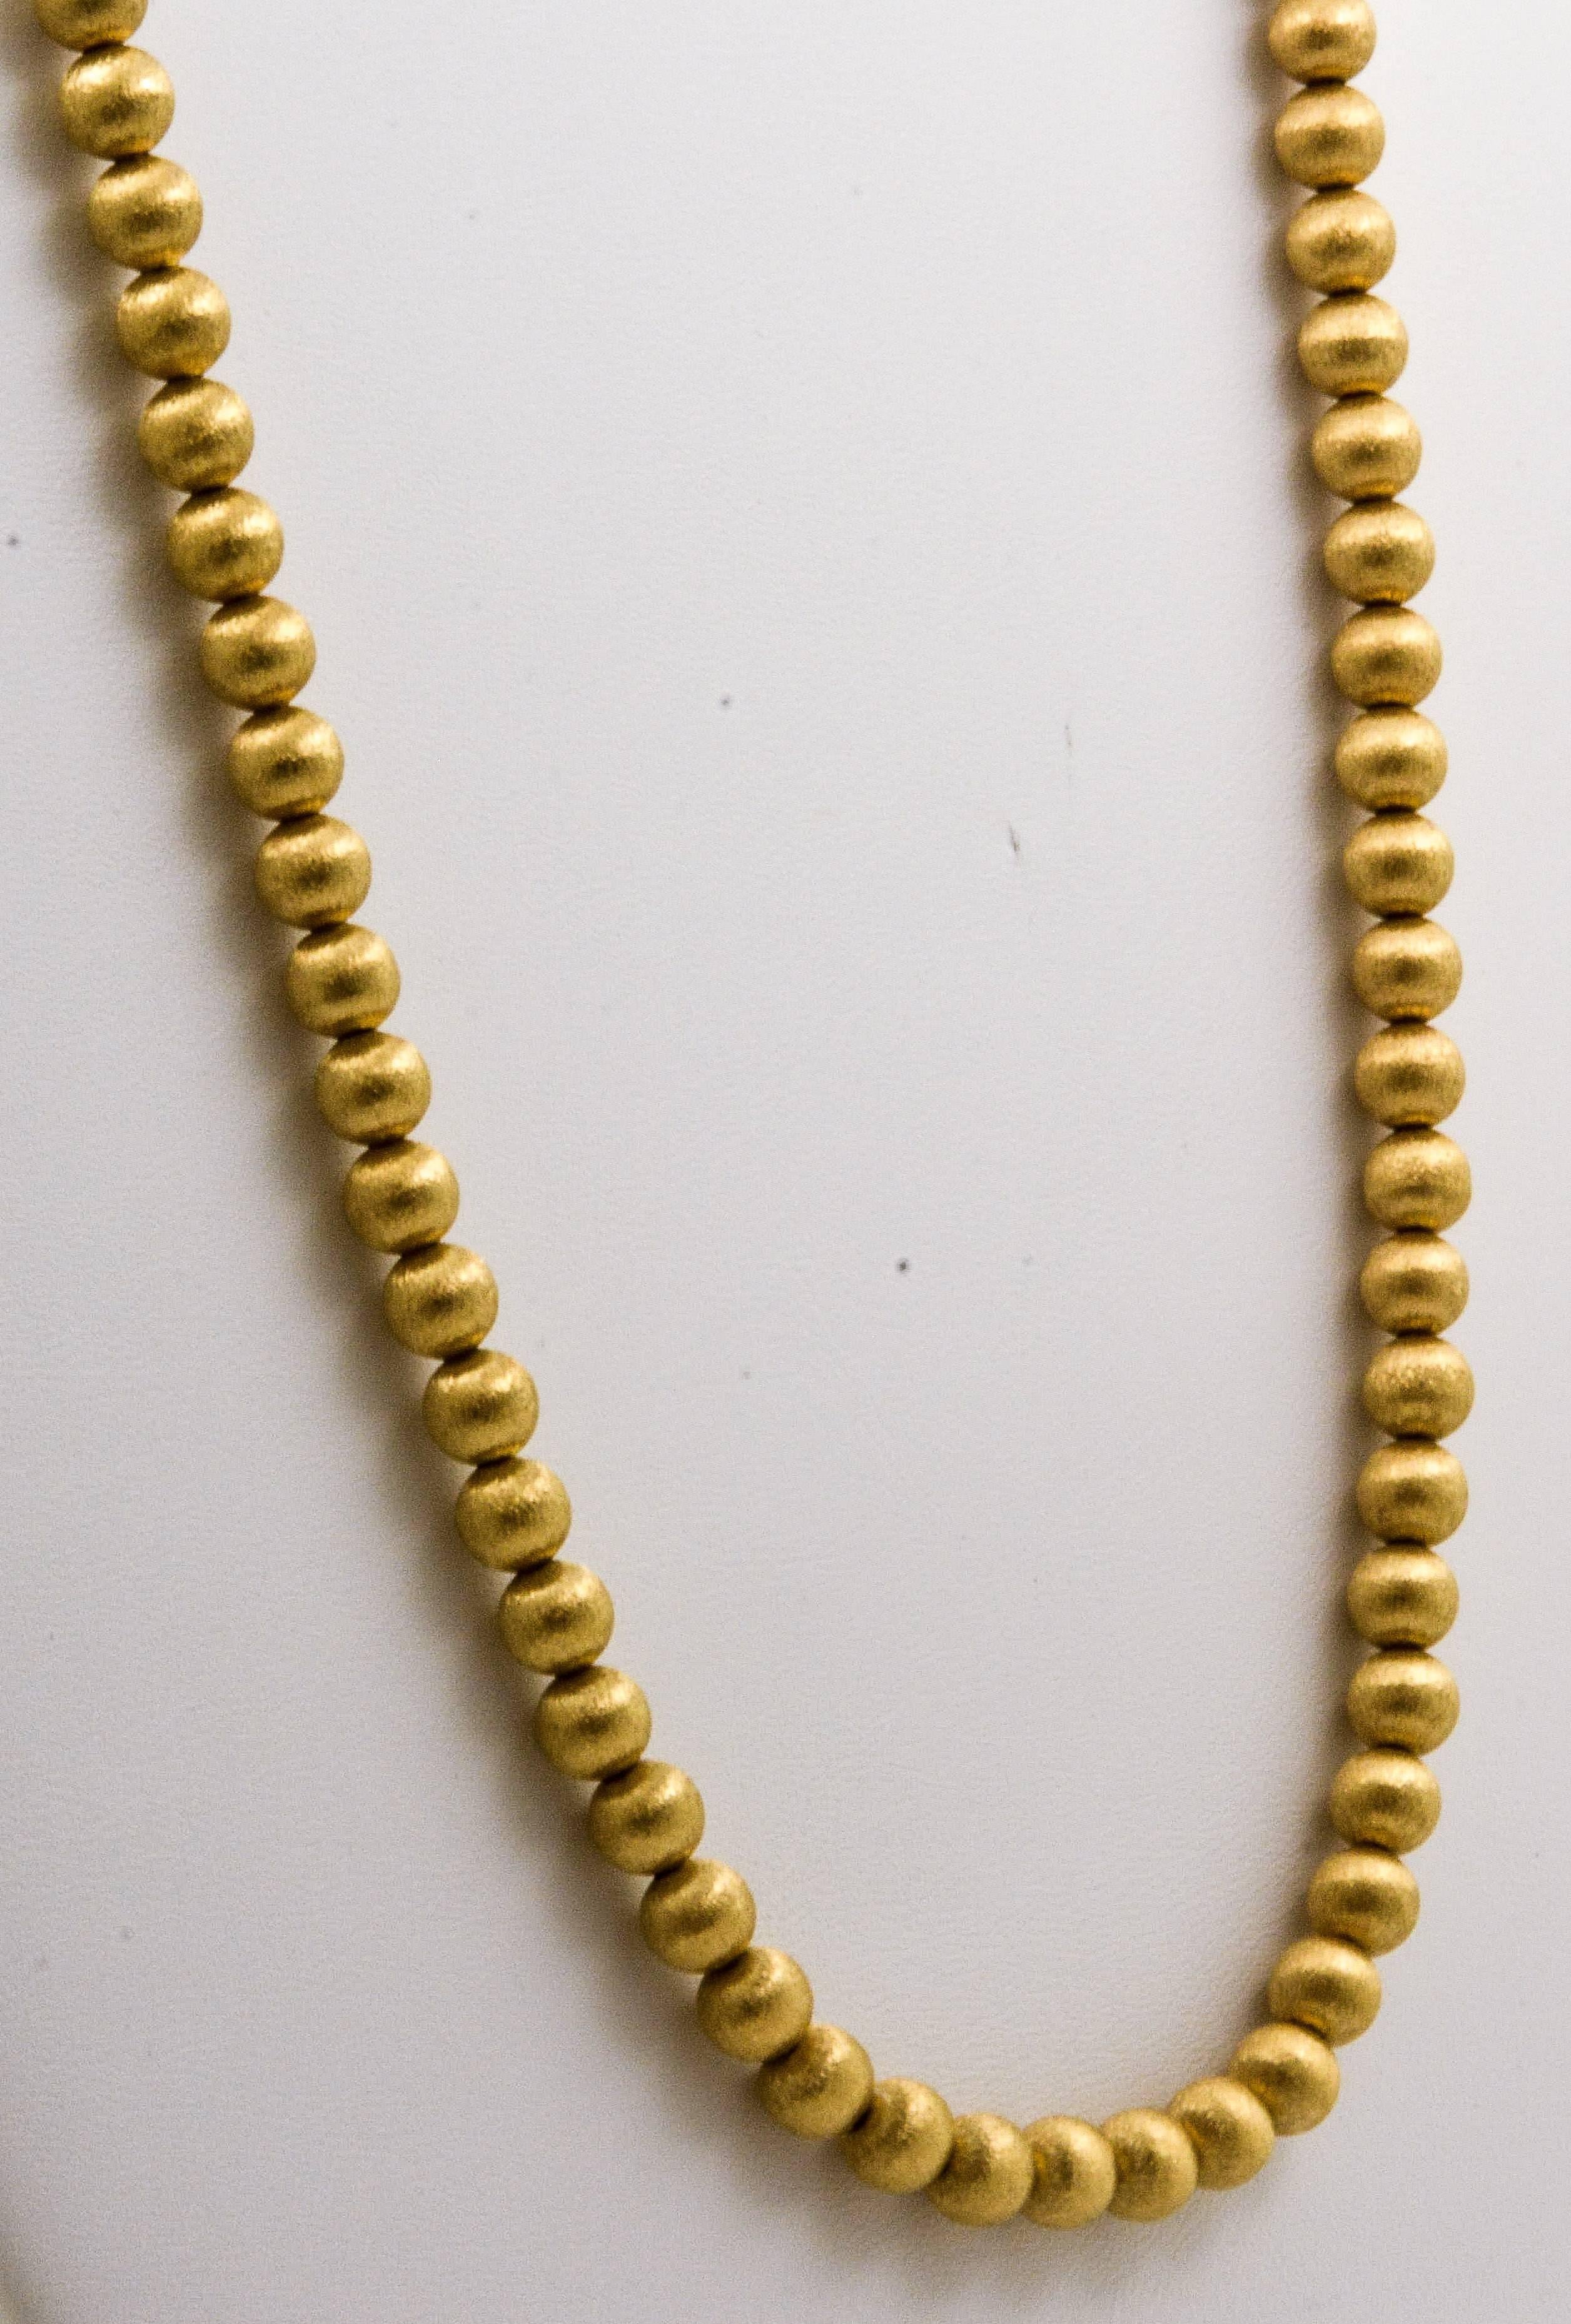 Sixty-six round 6.25mm textured beads fashioned from stunning 14kt yellow gold make this estate gold bead necklace a must-have. Strung on a 16in chain, these beads stand out with a brilliantly designed satin texture that sets this necklace apart and